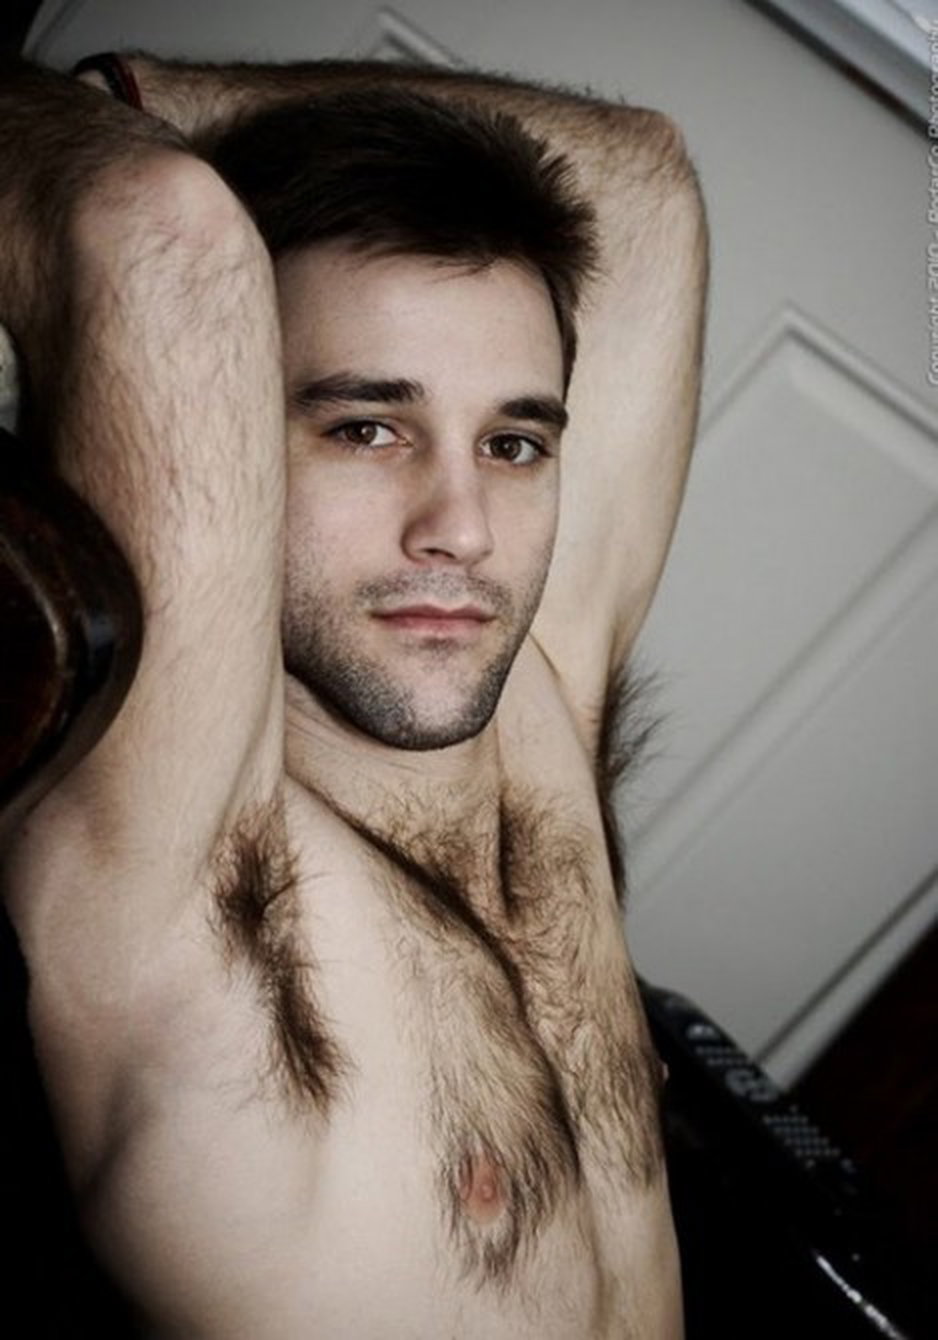 Photo by Smitty with the username @Resol702,  January 31, 2020 at 4:04 PM. The post is about the topic Gay Hairy Armpits